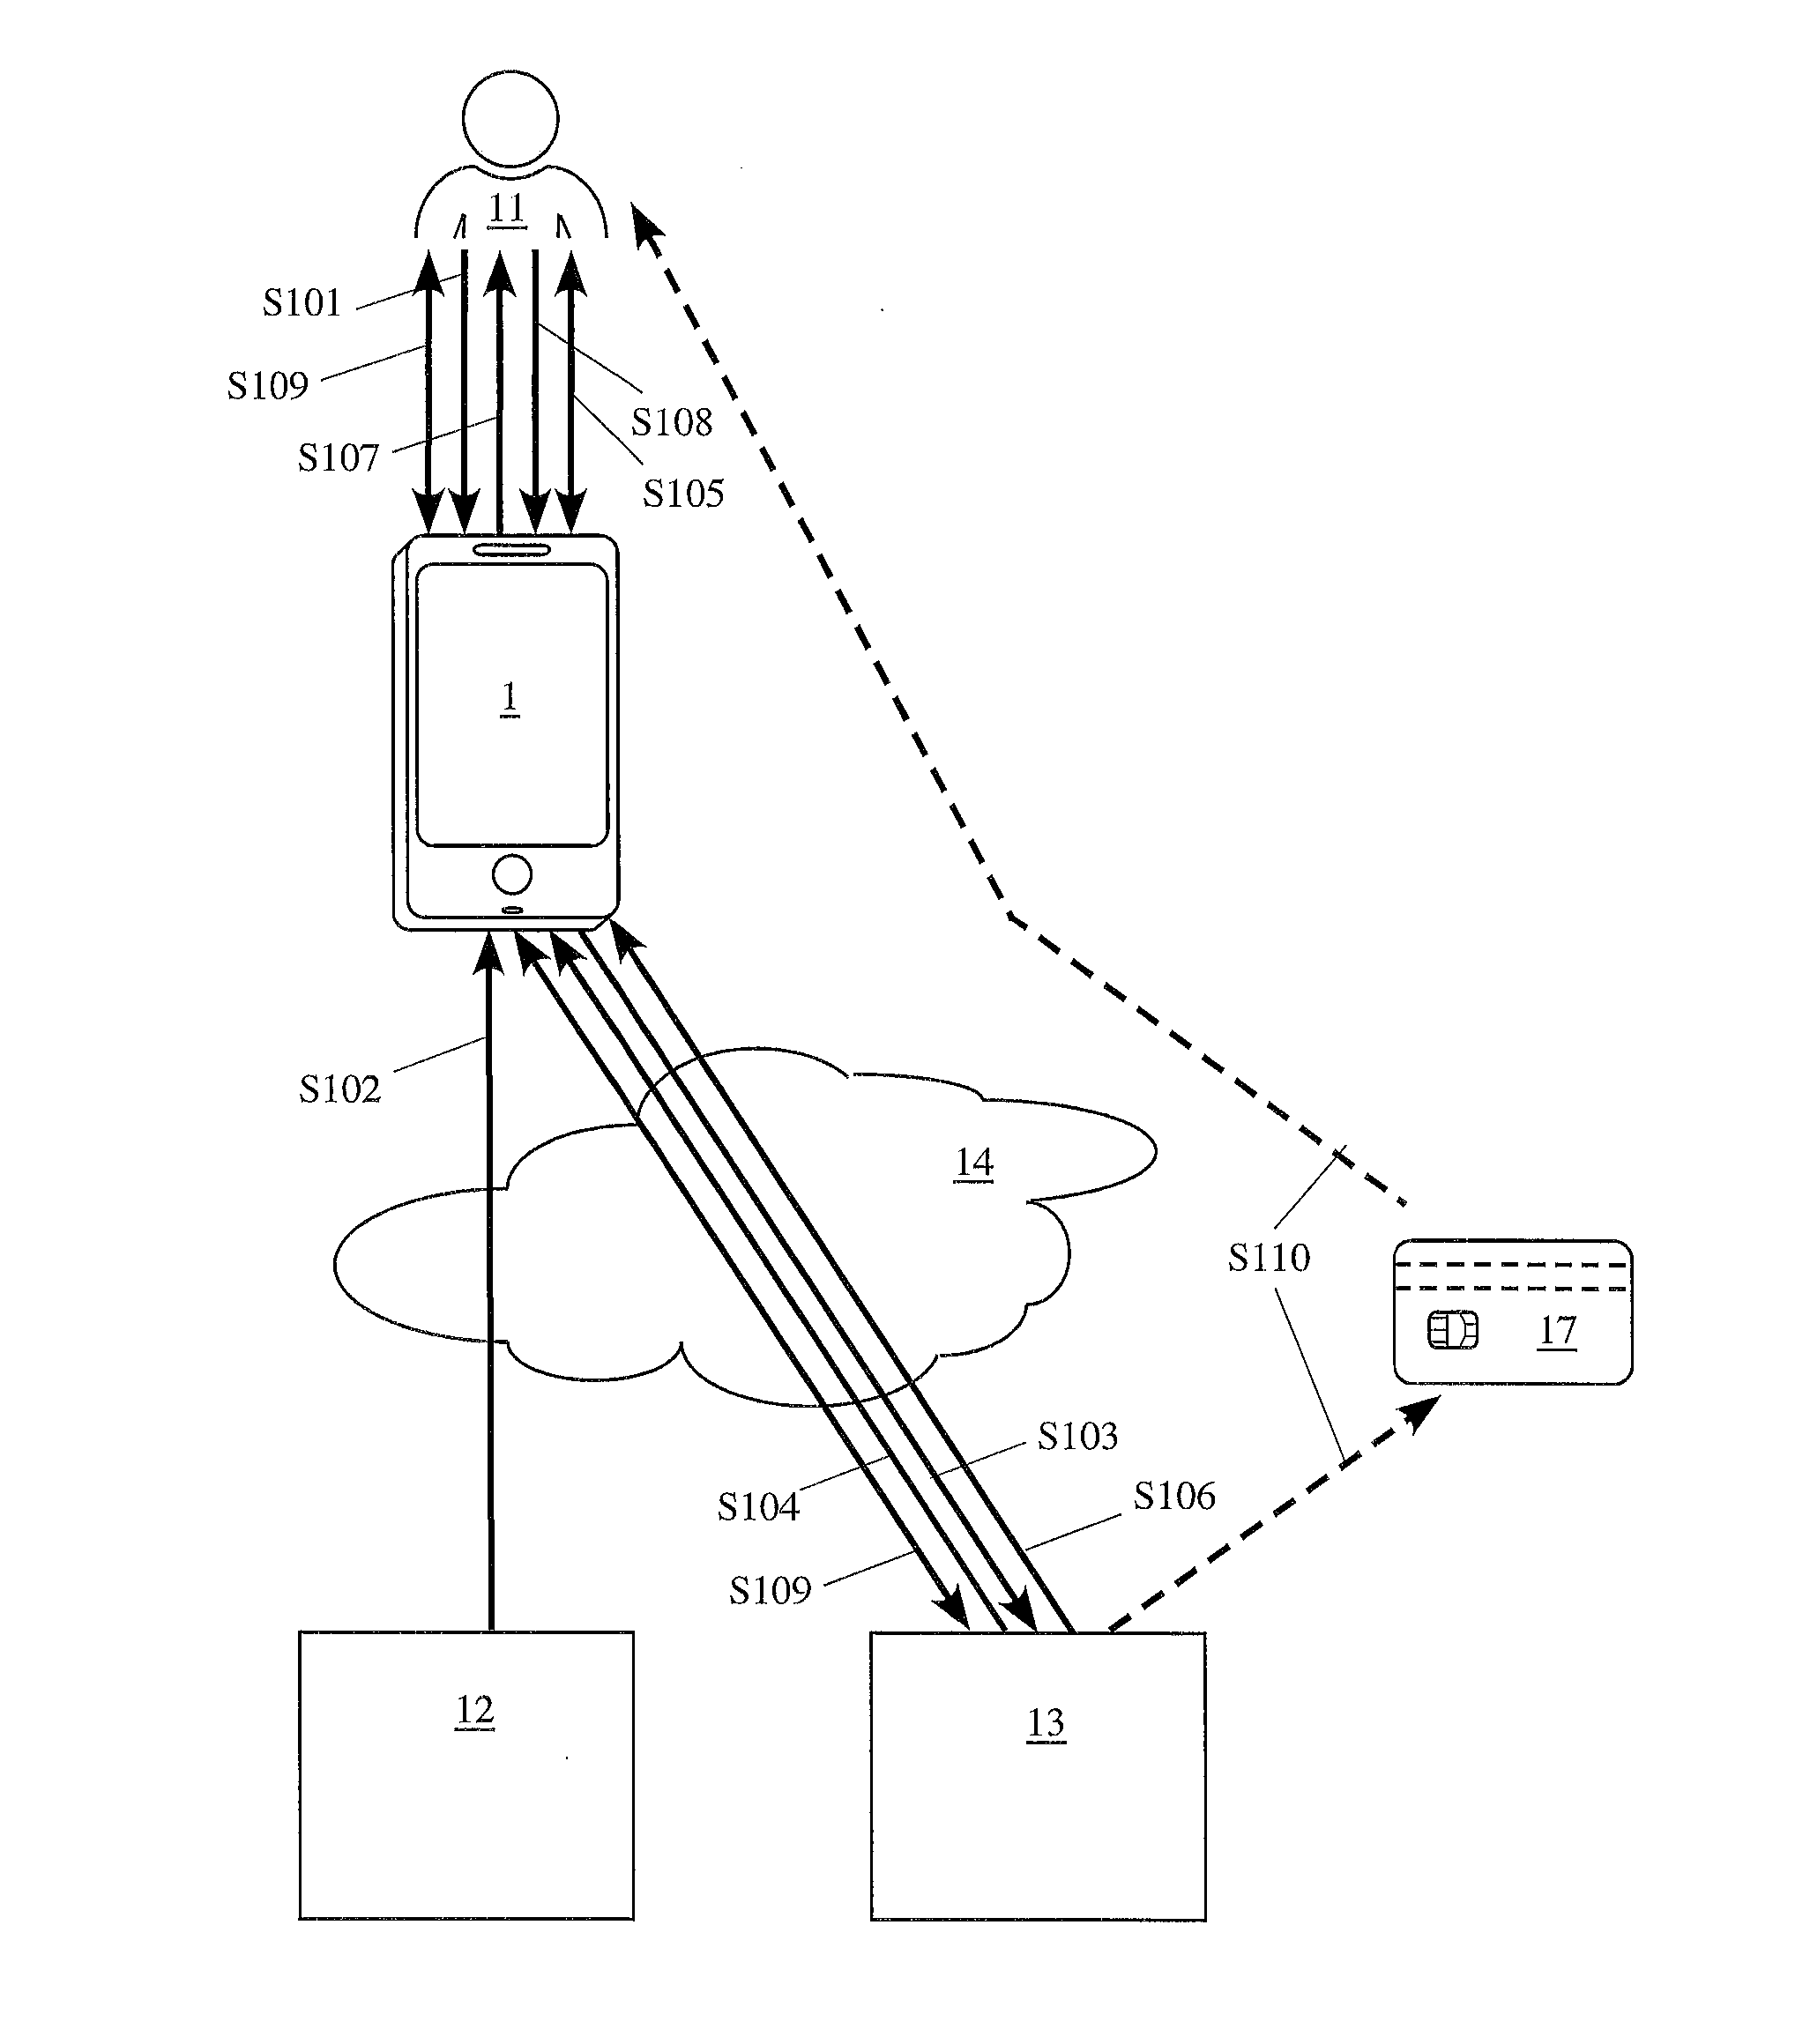 Mobile electronic device and use thereof for electronic transactions